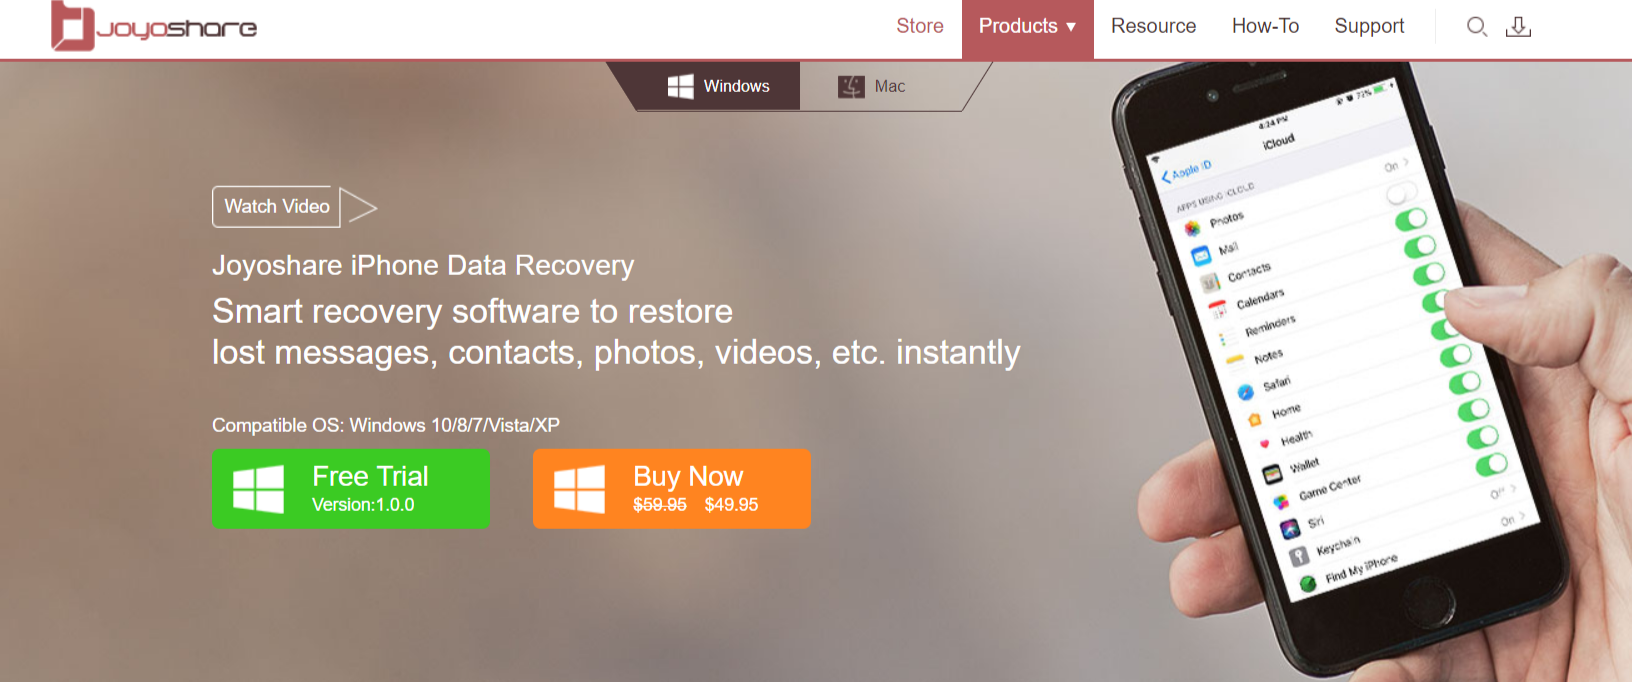 for ipod download Joyoshare iPhone Data Recovery